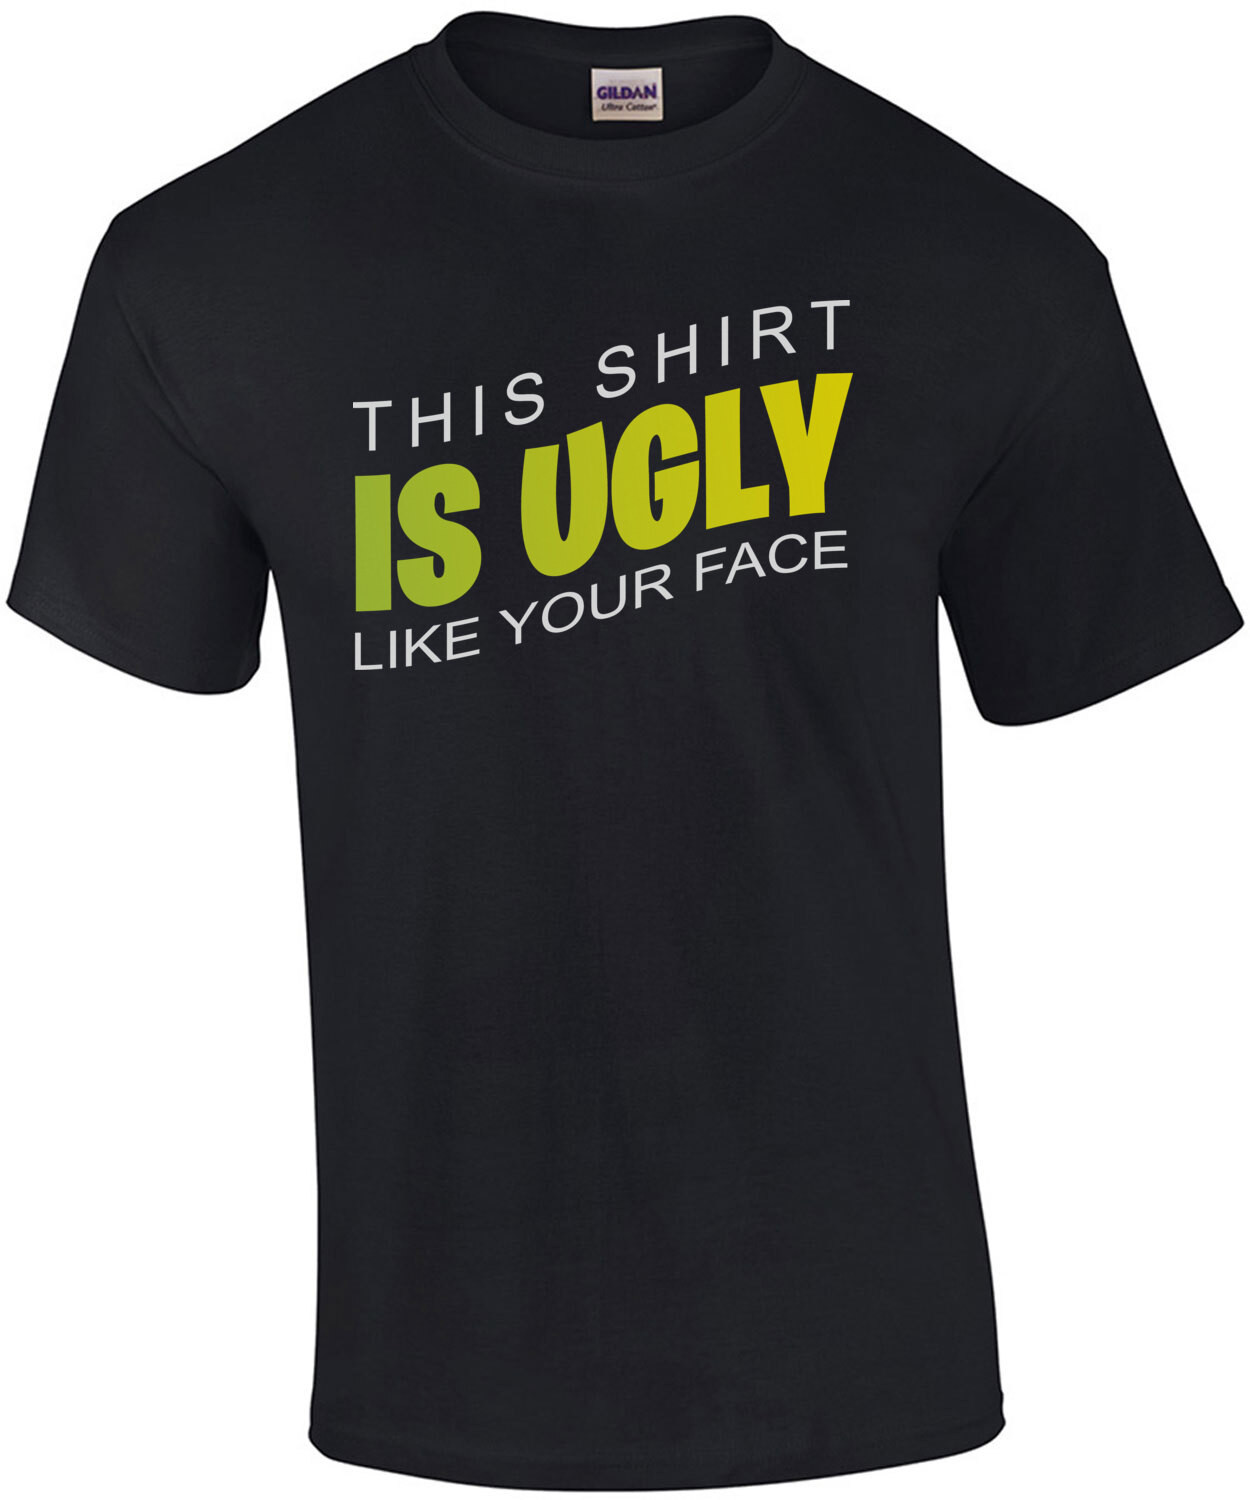 This shirt is ugly like your face - funny t-shirt